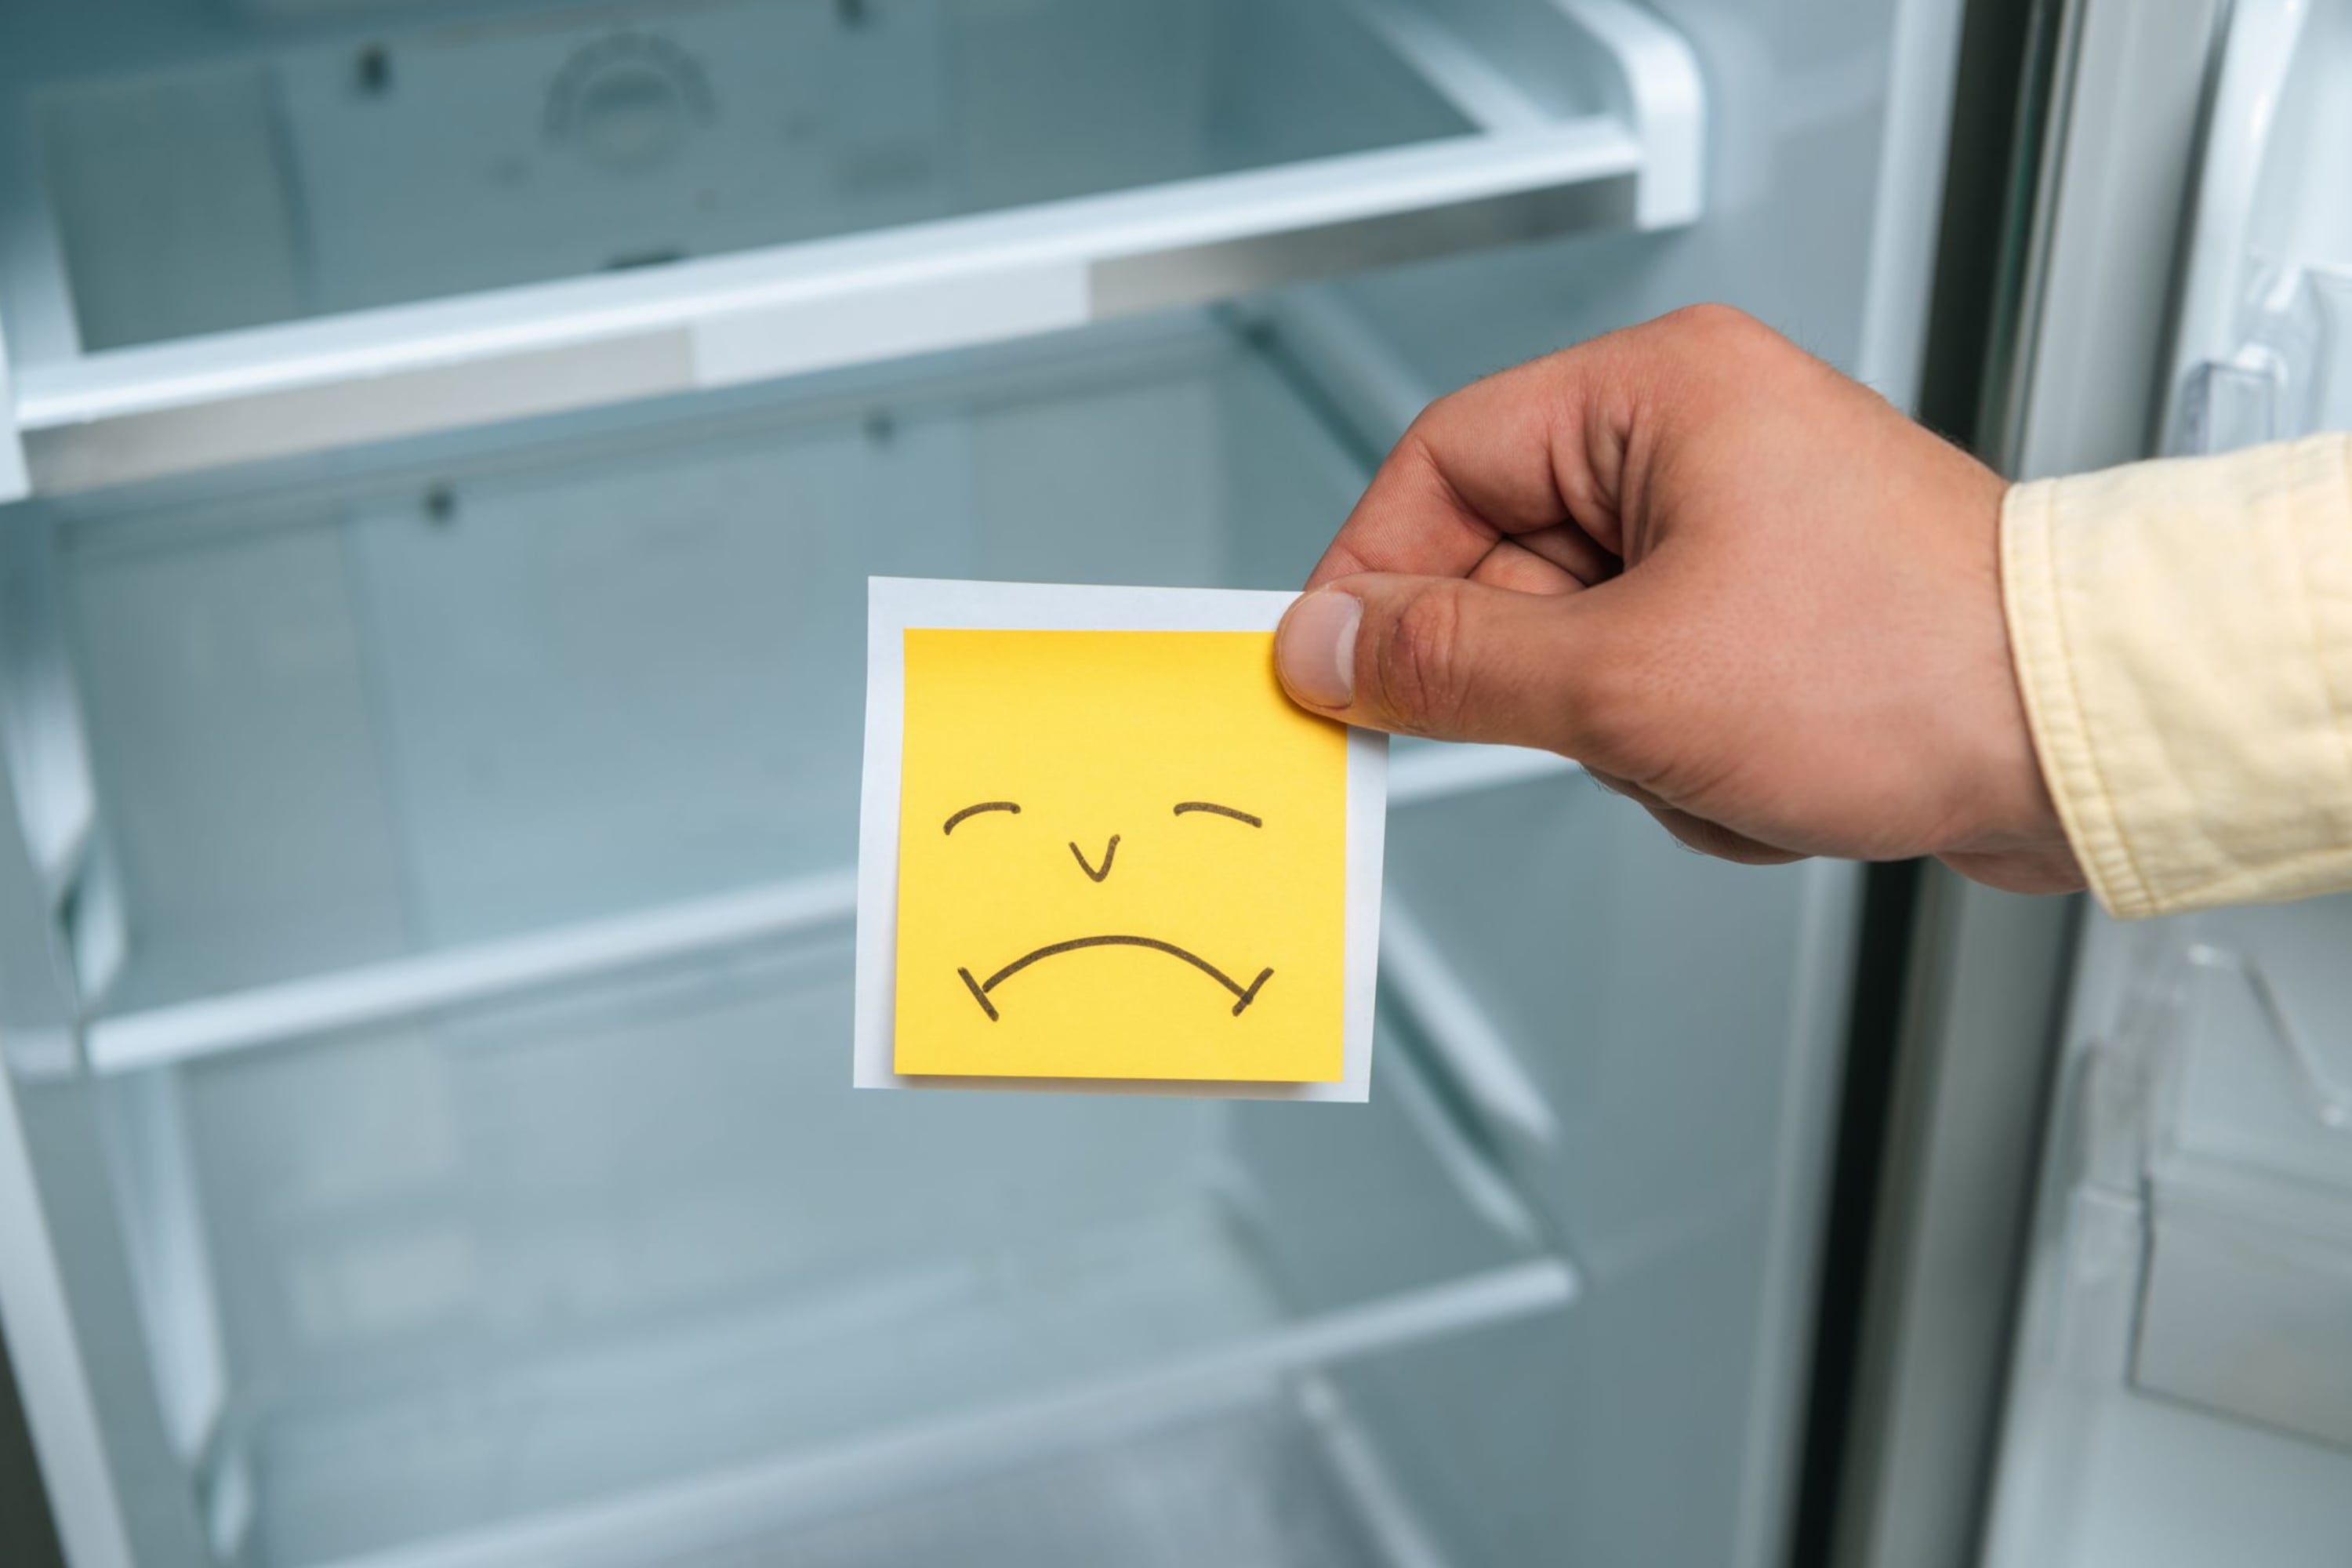 3. Do not open your fridge to conserve perishable foods